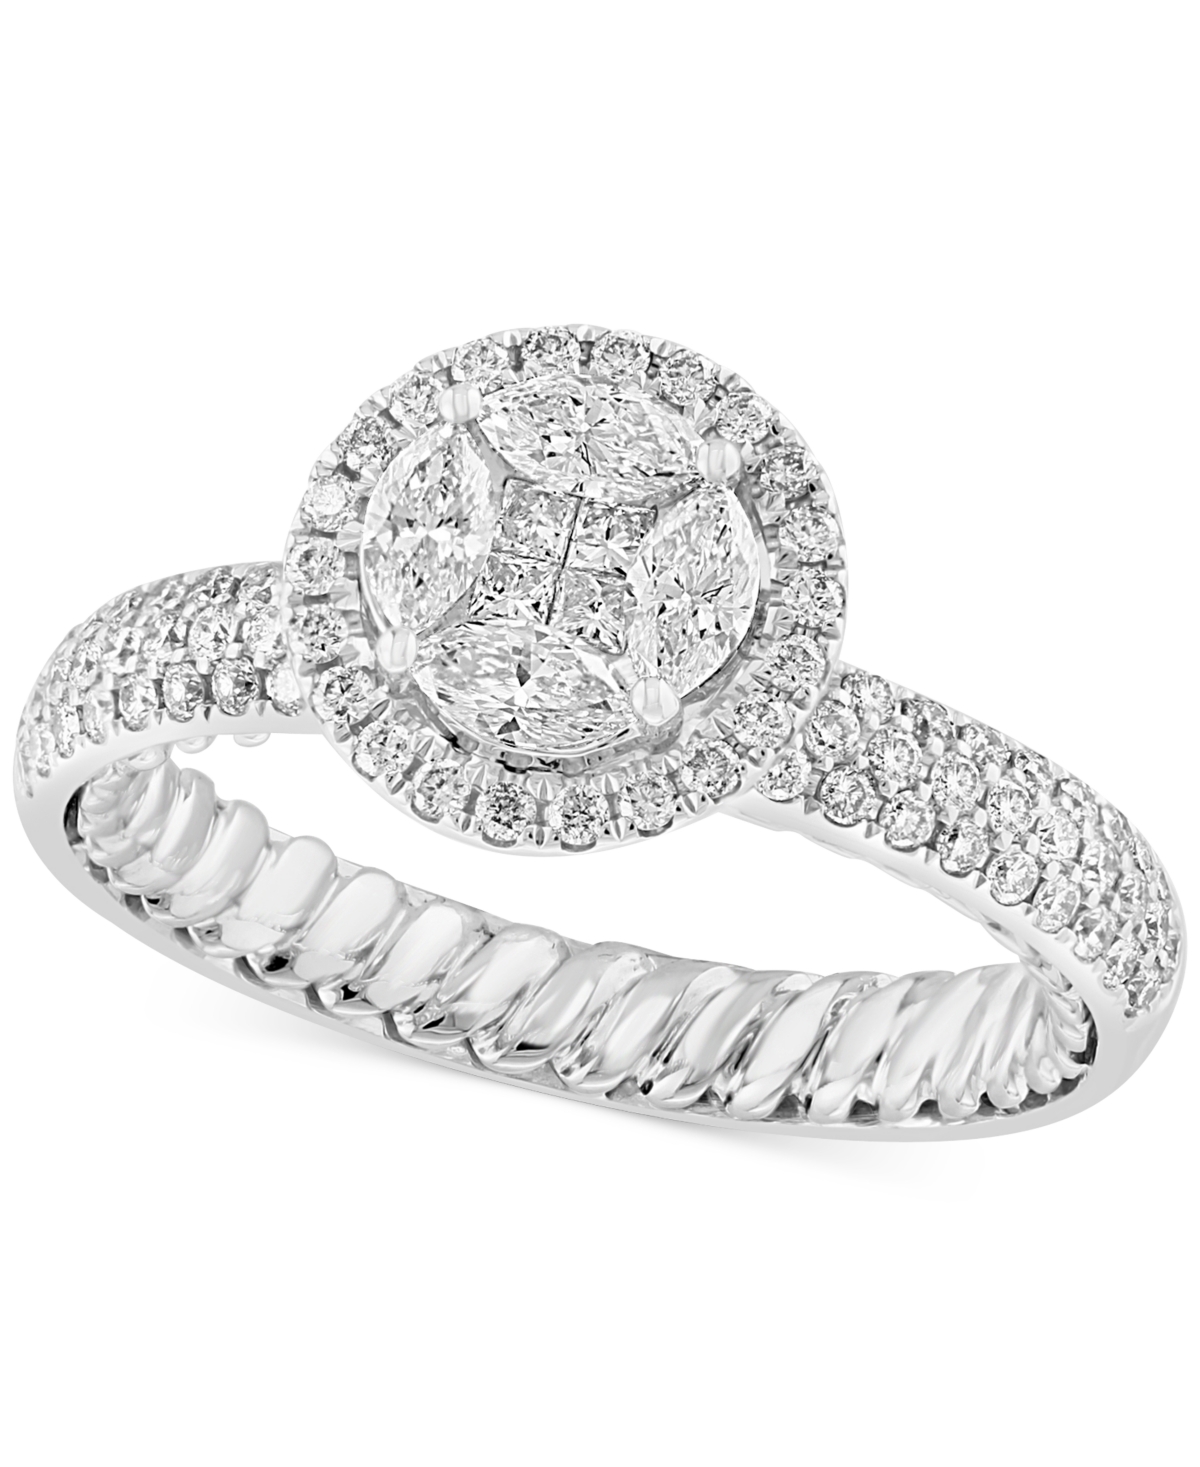 Effy Collection Effy Diamond Multi-Cut Halo Cluster Pave Ring (1 ct. t.w.) in 14k White Gold